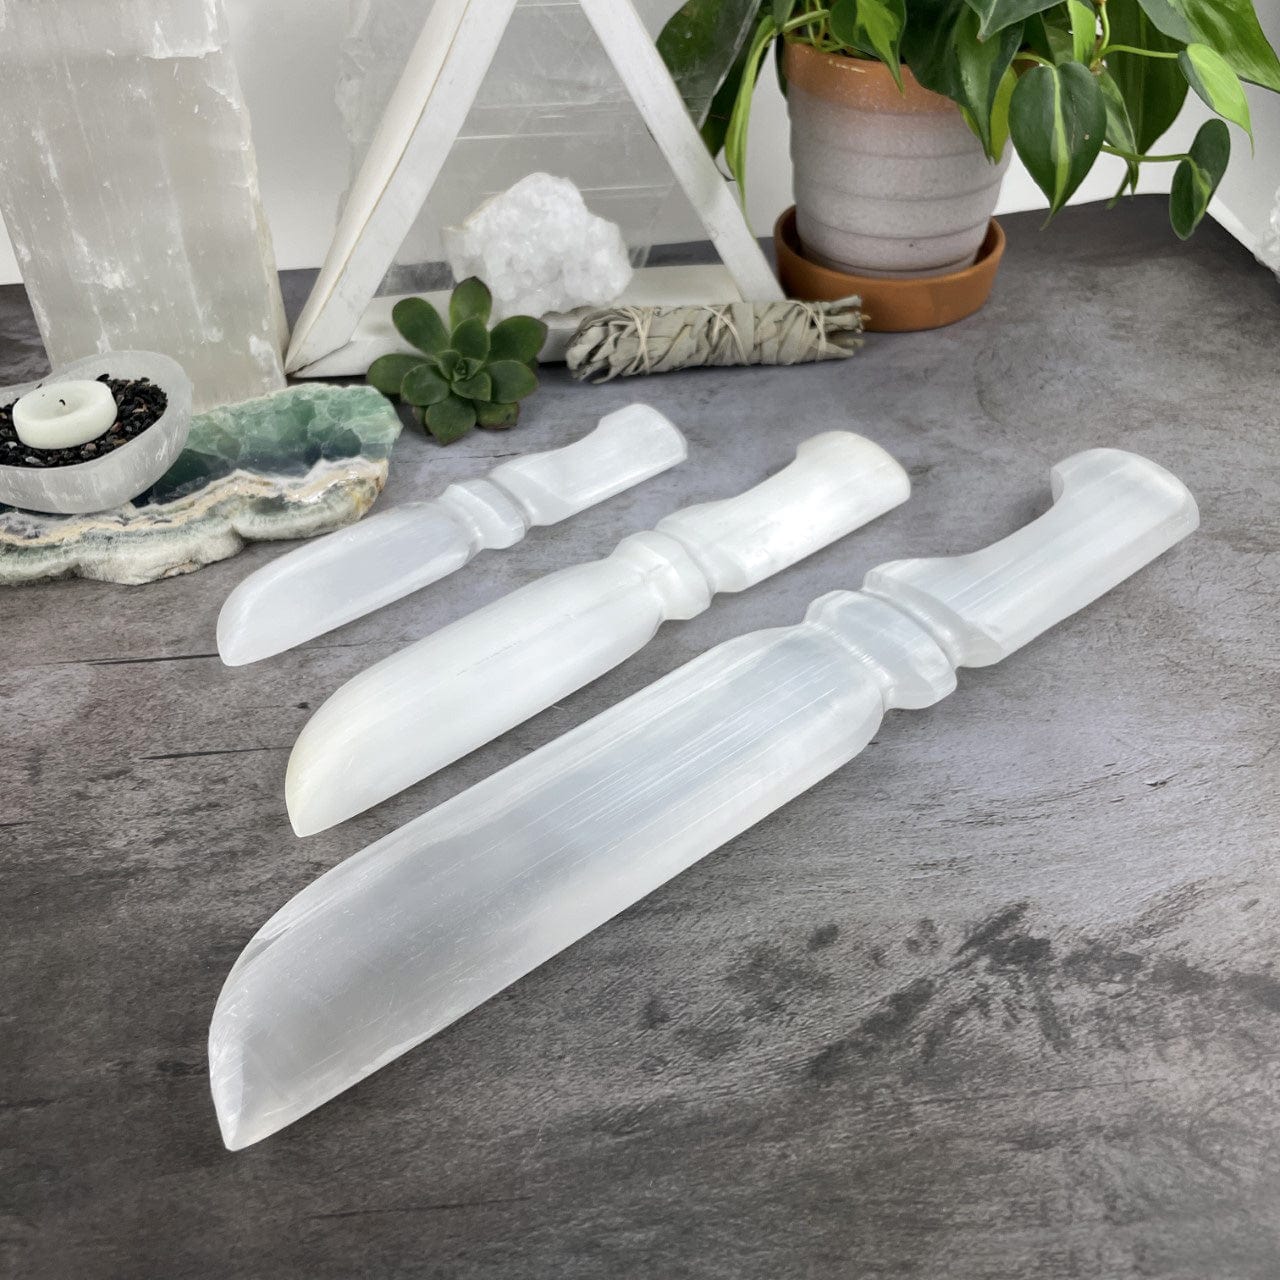 3 sizes of Selenite Knives with Hand Cut and Polished Handles from the side